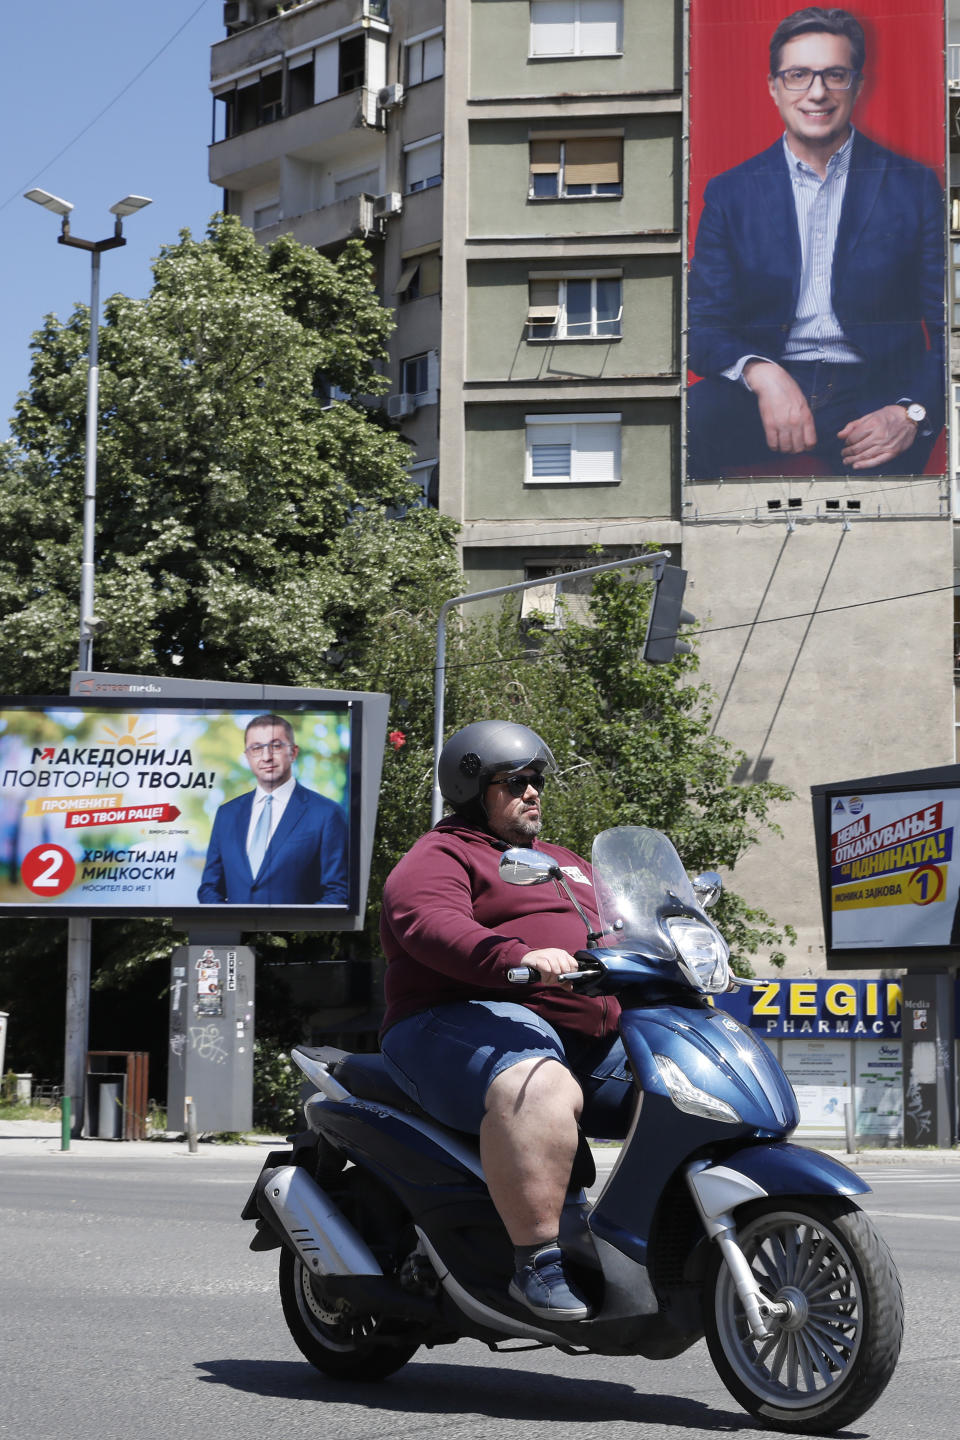 Posters of Hristijan Mickoski, the leader of the center-right main opposition VMRO-DPMNE party, left and Stevo Pendarovski, incumbent President and the presidential candidate backed by the ruling social democrats (SDSM), top right are displayed in a street in Skopje, North Macedonia, on Monday, May 6, 2024. Voters go to the polls on Wednesday in North Macedonia to cast ballots for parliamentary election and presidential runoff, for the second time in two weeks. (AP Photo/Boris Grdanoski)